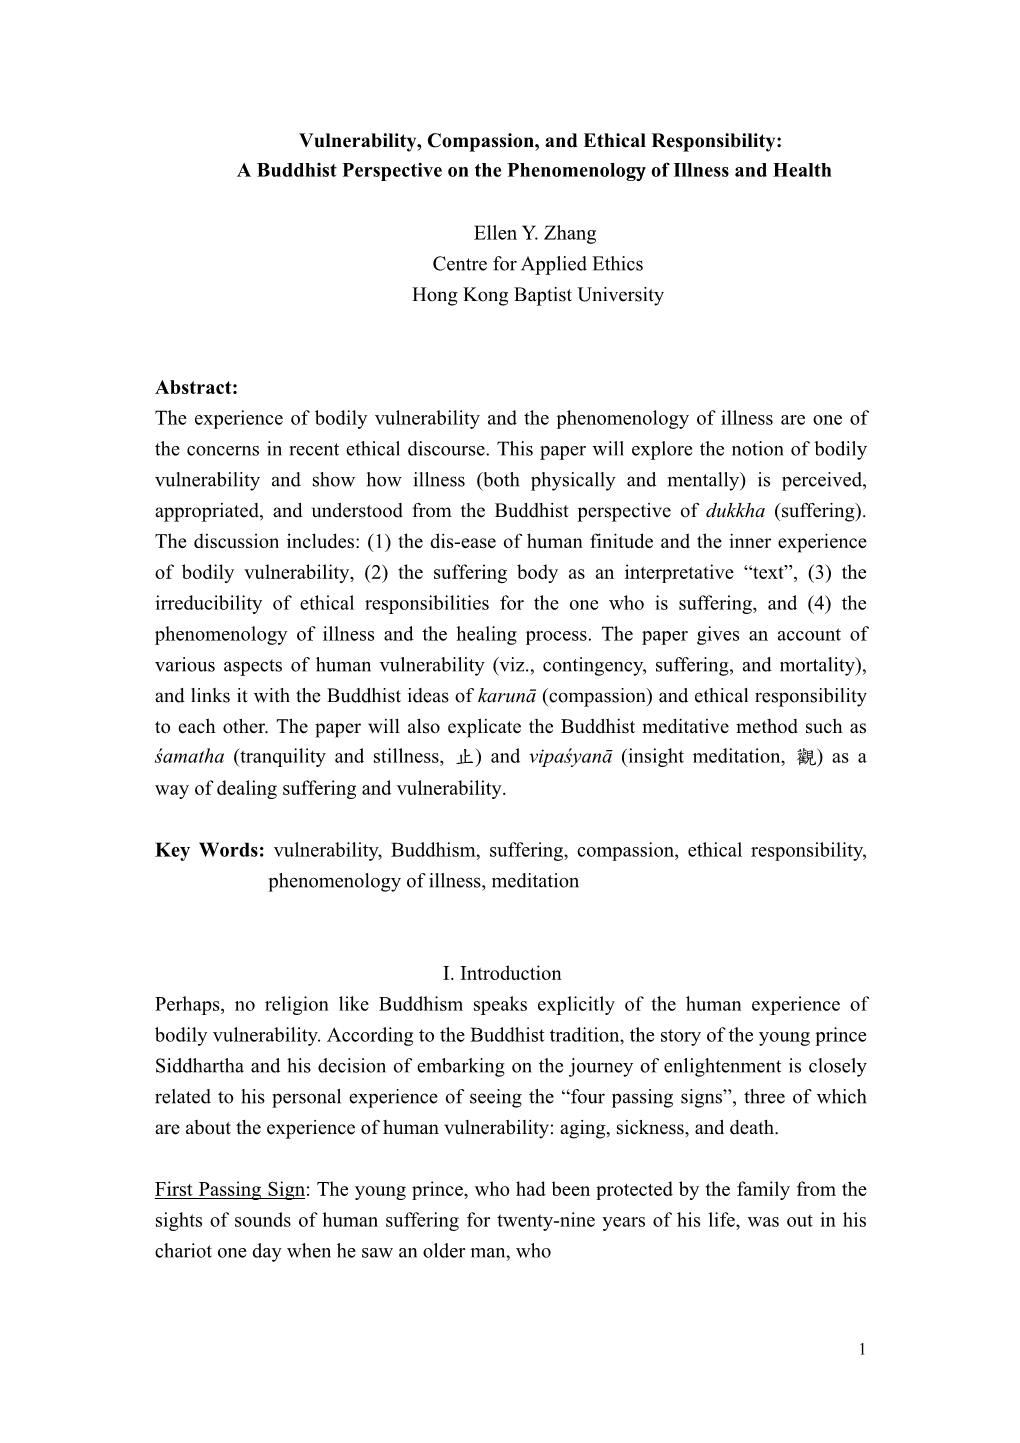 Vulnerability, Compassion, and Ethical Responsibility: a Buddhist Perspective on the Phenomenology of Illness and Health